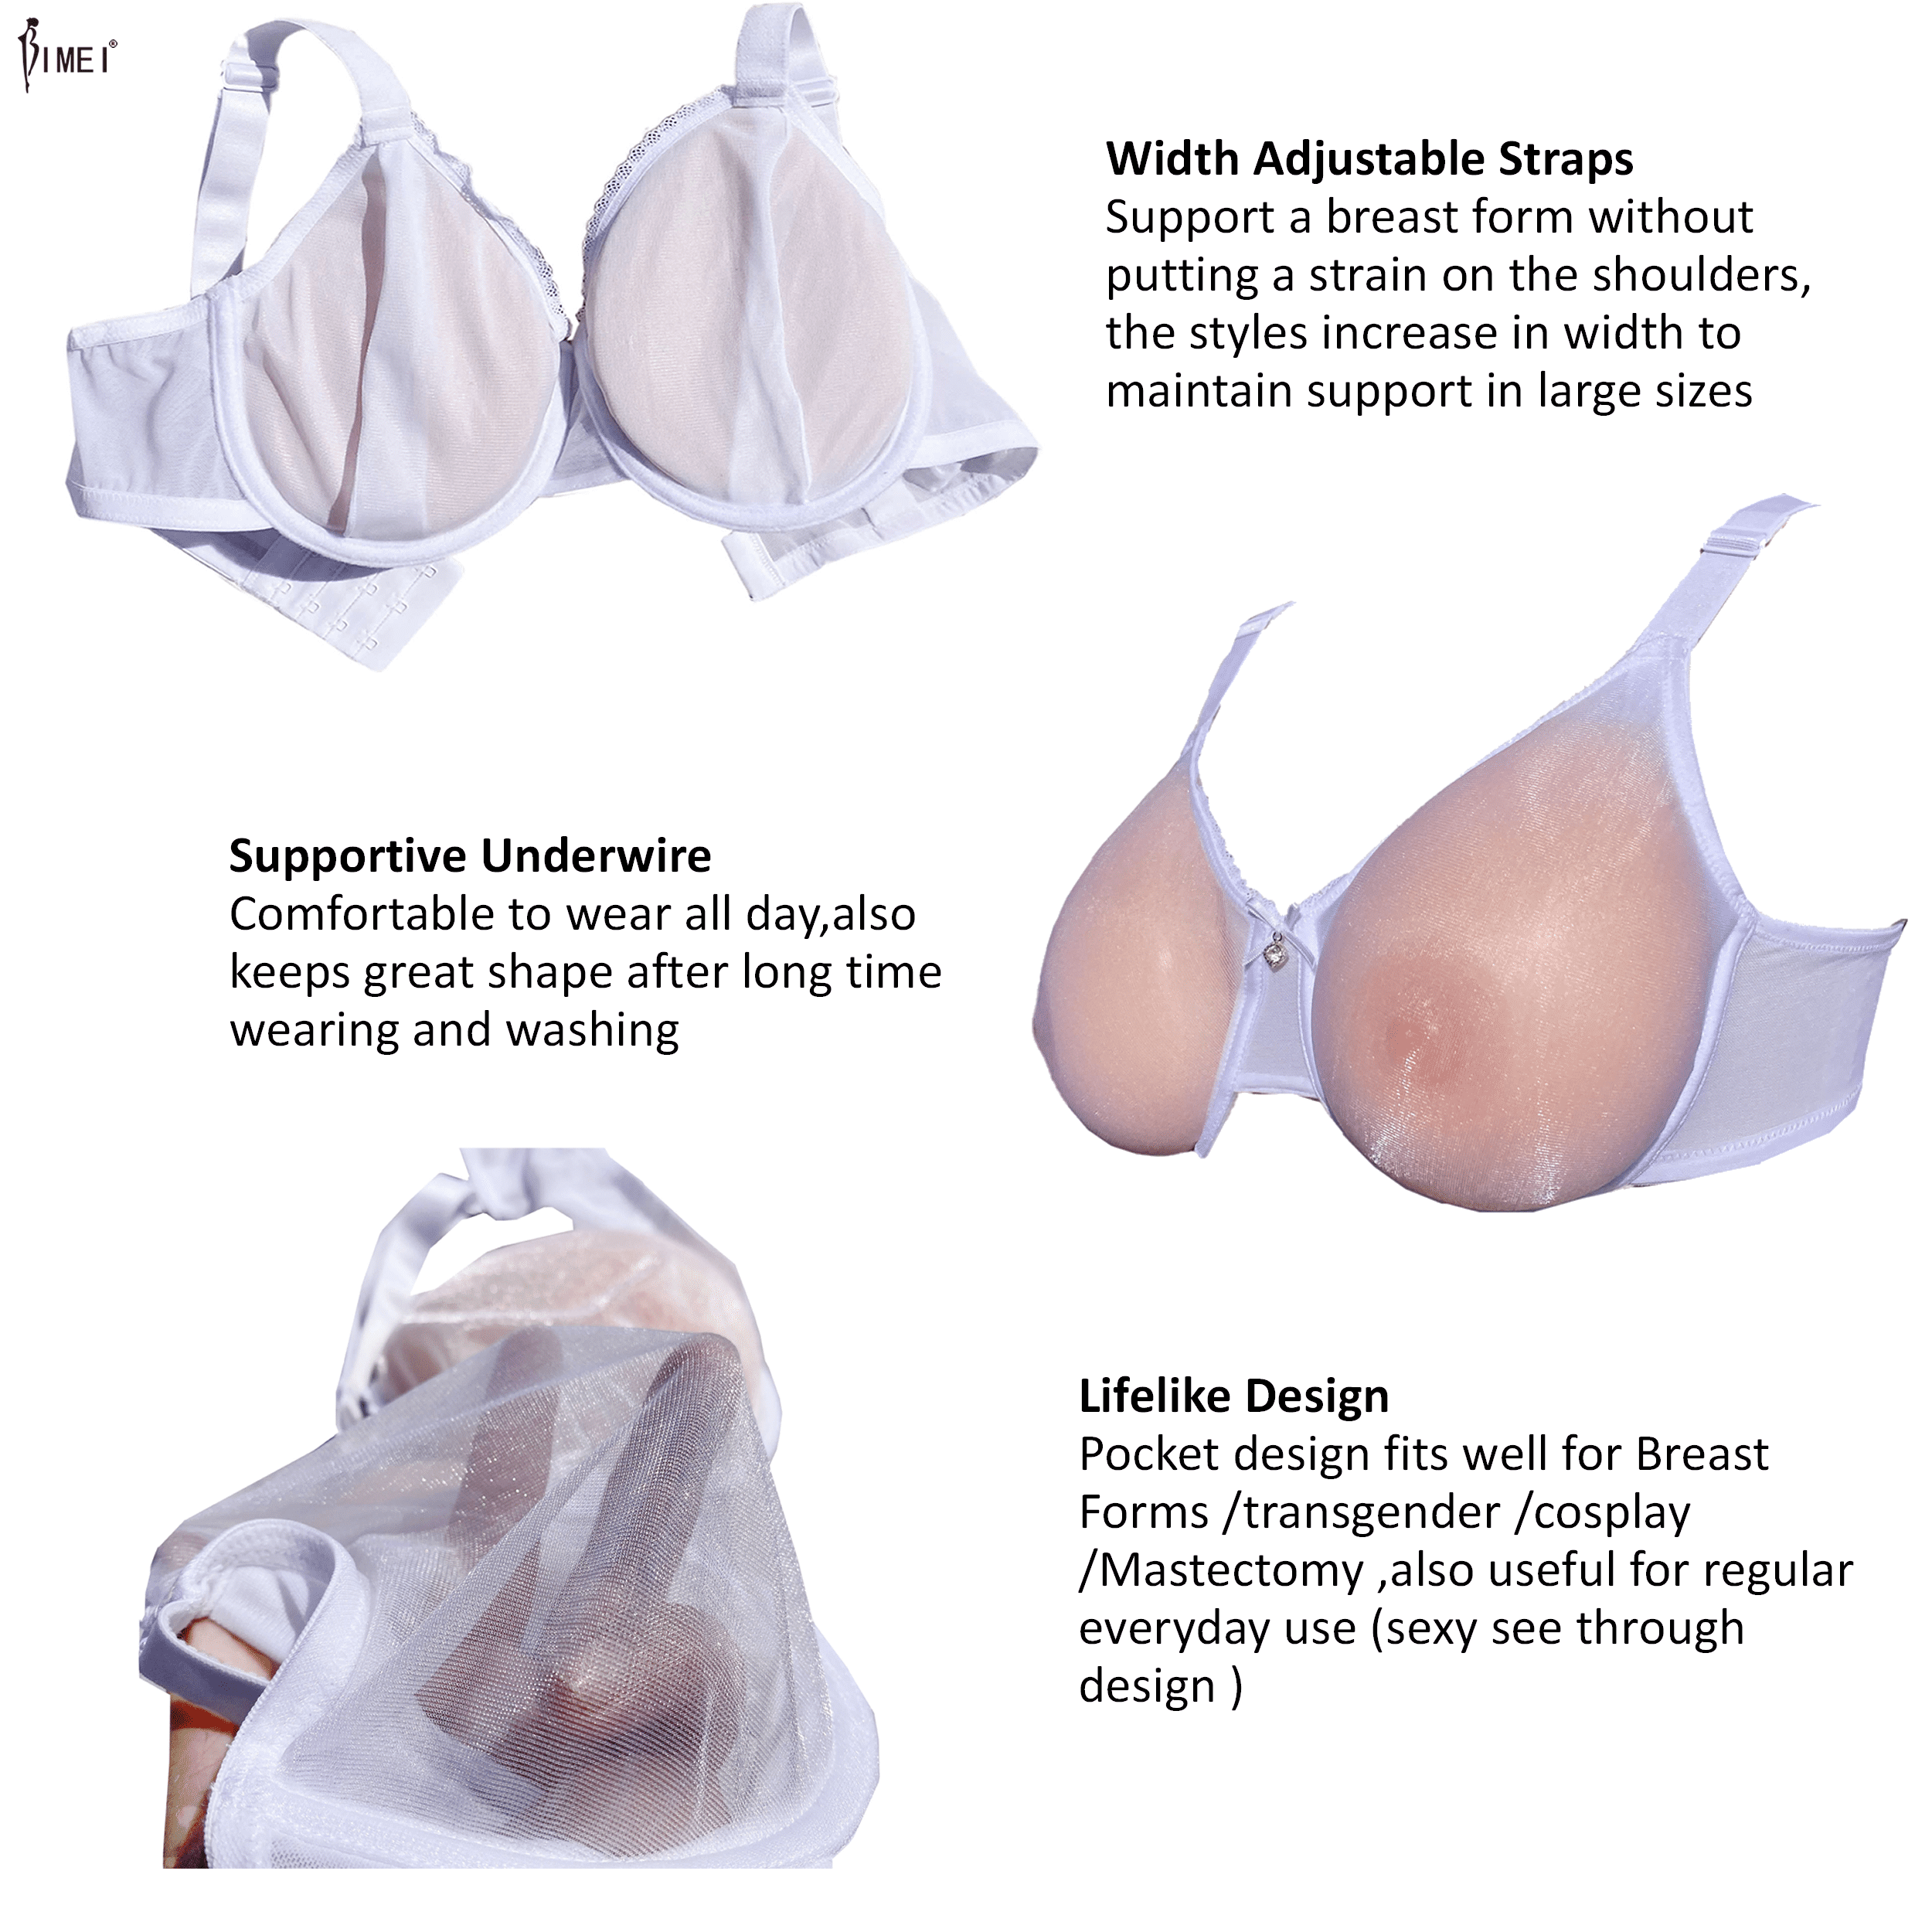 BIMEI See Through Bra CD Mastectomy Lingerie Bra Silicone Breast Forms  Prosthesis Pocket Bra with Steel Ring 9008,White,42C